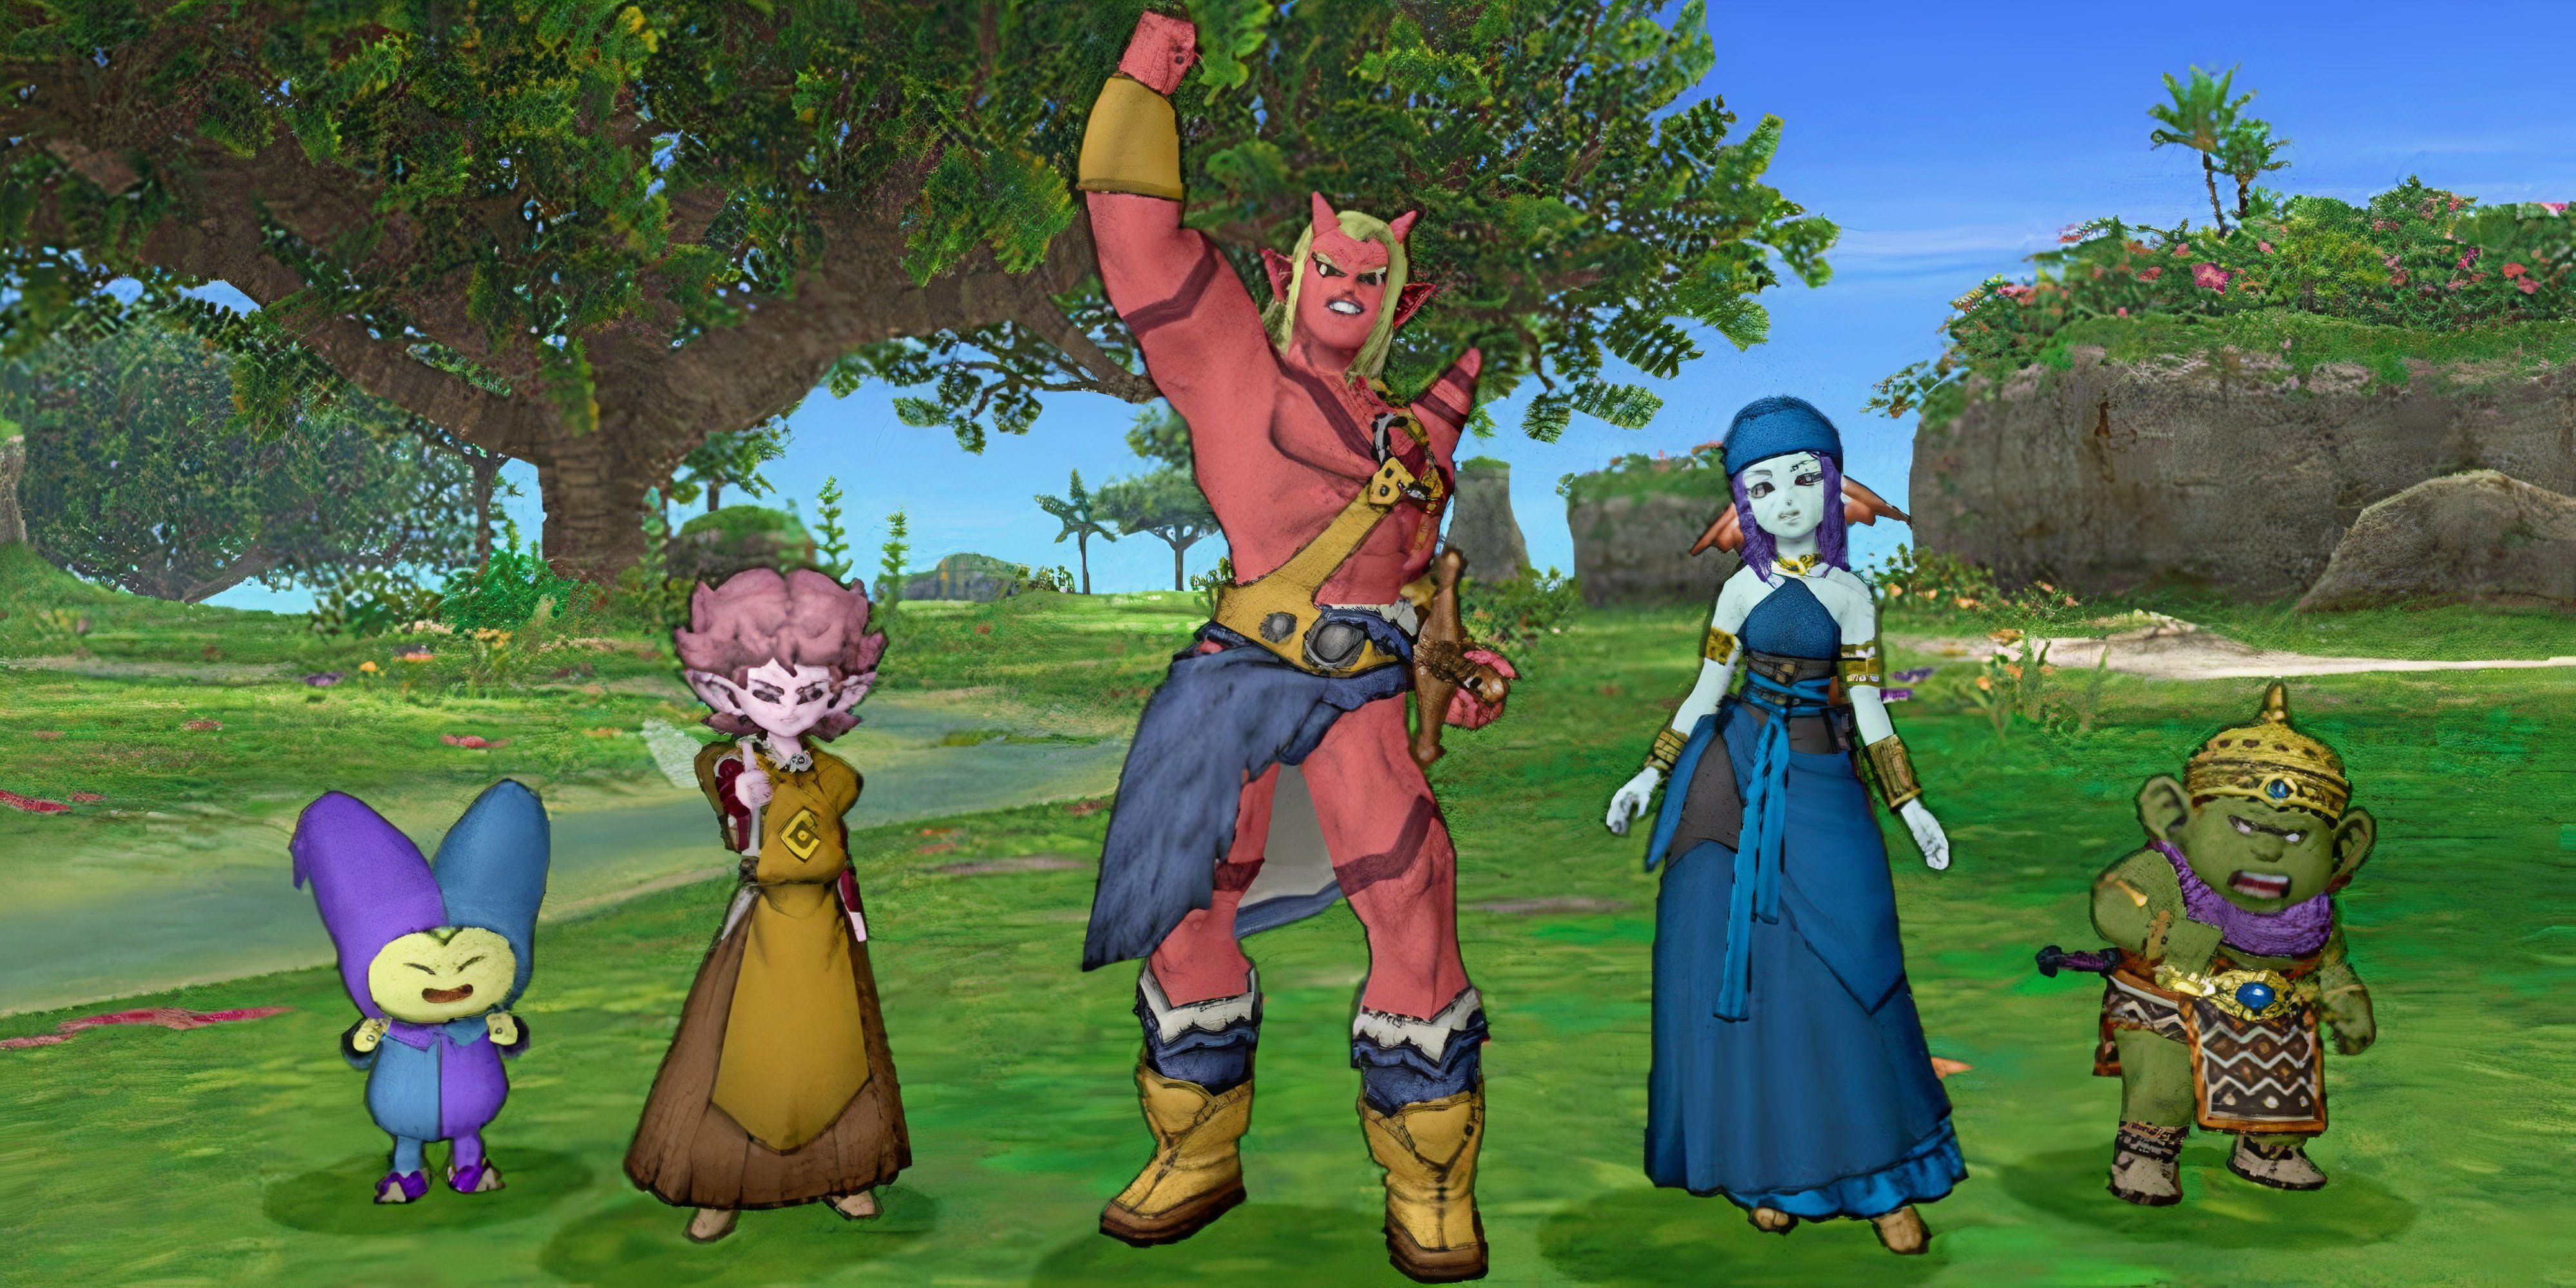 Dragon Quest 10 MMO Characters standing together